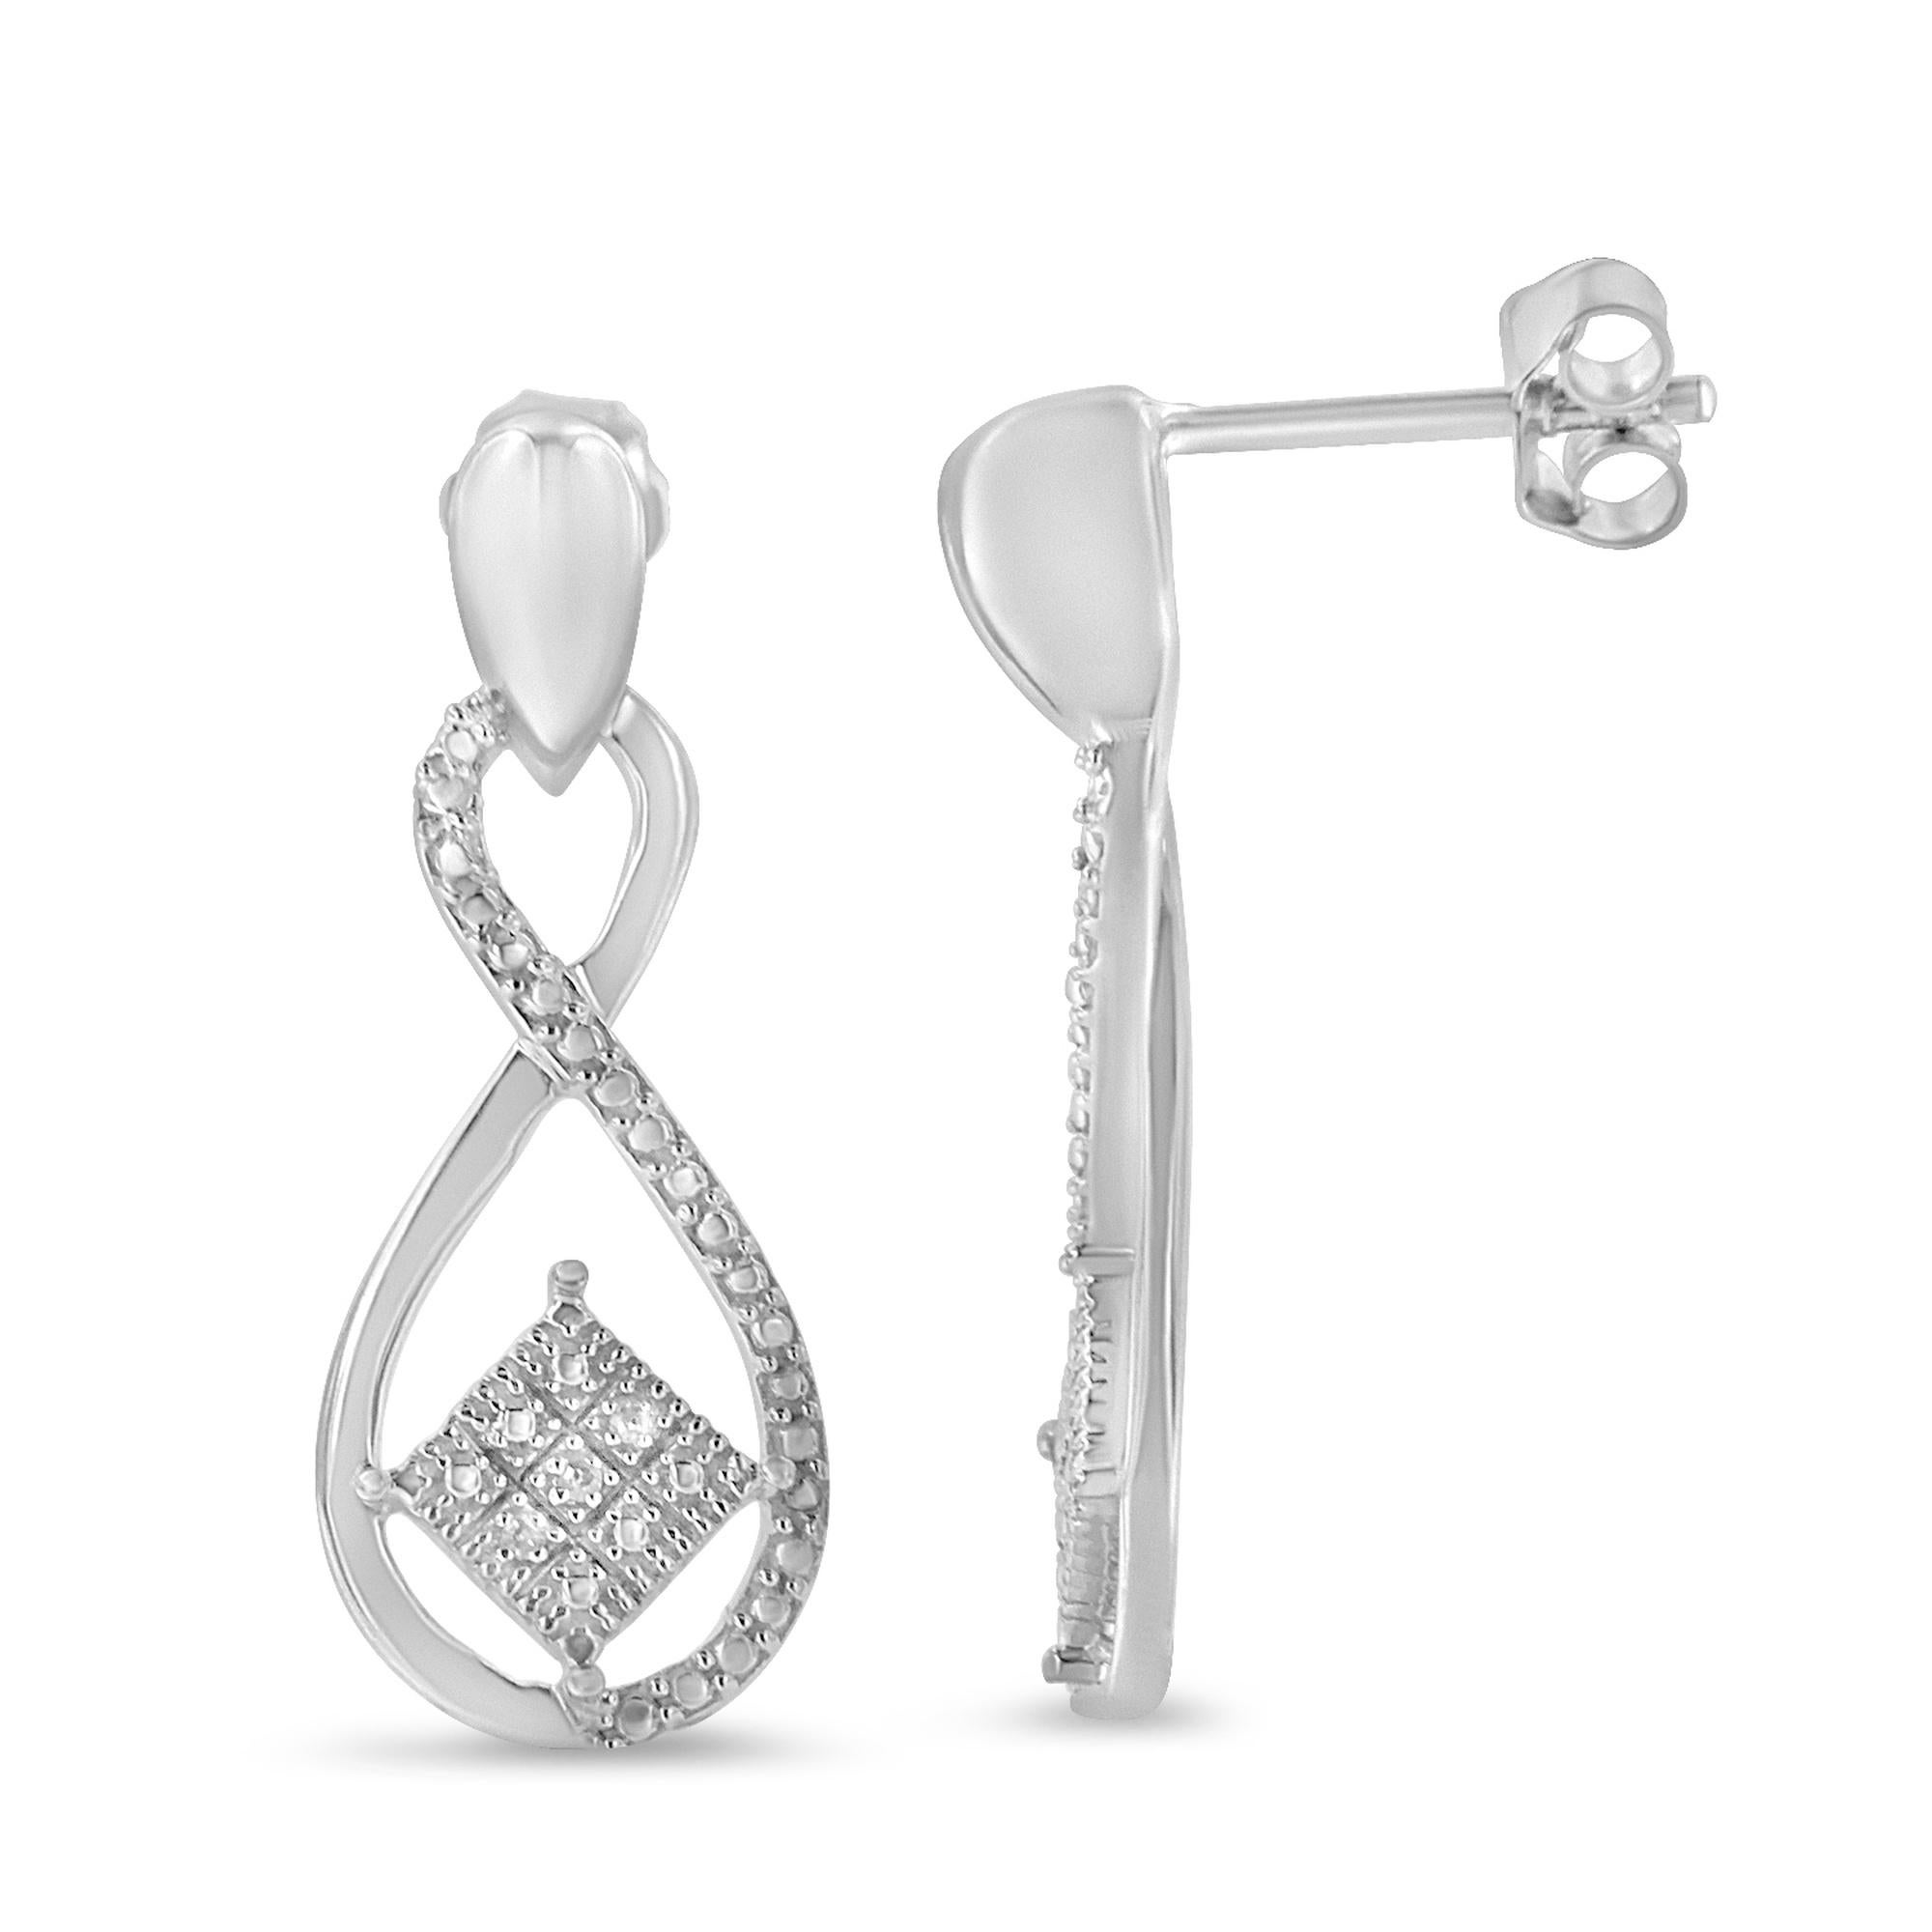 Uniquely designed in the infinity shape, the earrings feature square accents in the center. Composed of alluring sterling silver, the pair of earrings is polished high to shine. They are beautifully adorned with round cut diamonds that are arranged